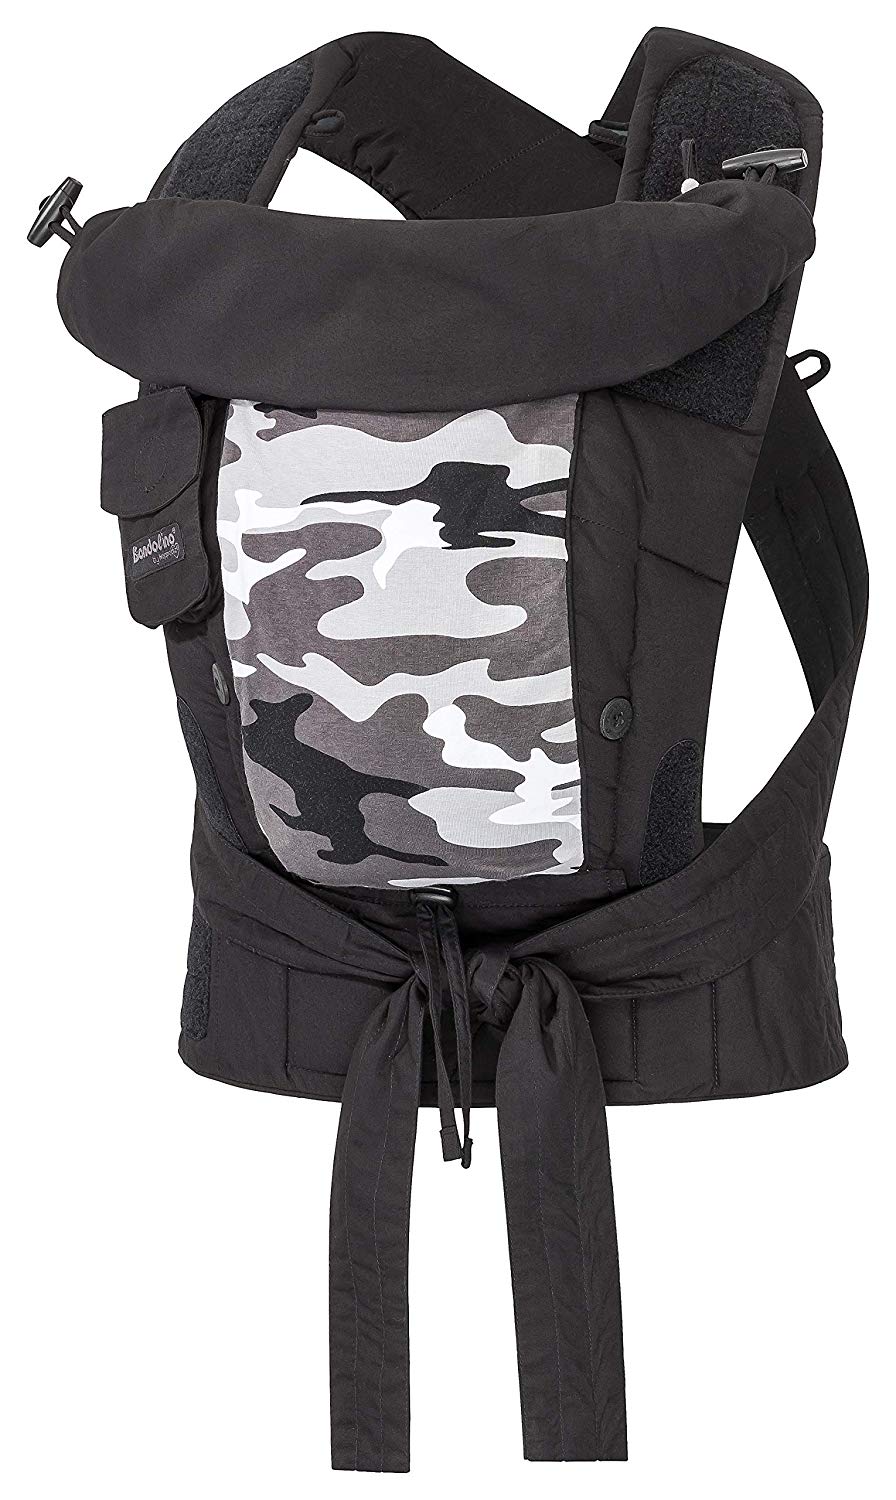 Bondolino Plus Baby Carrier with Binding Instructions, Slim-Fit Camouflage